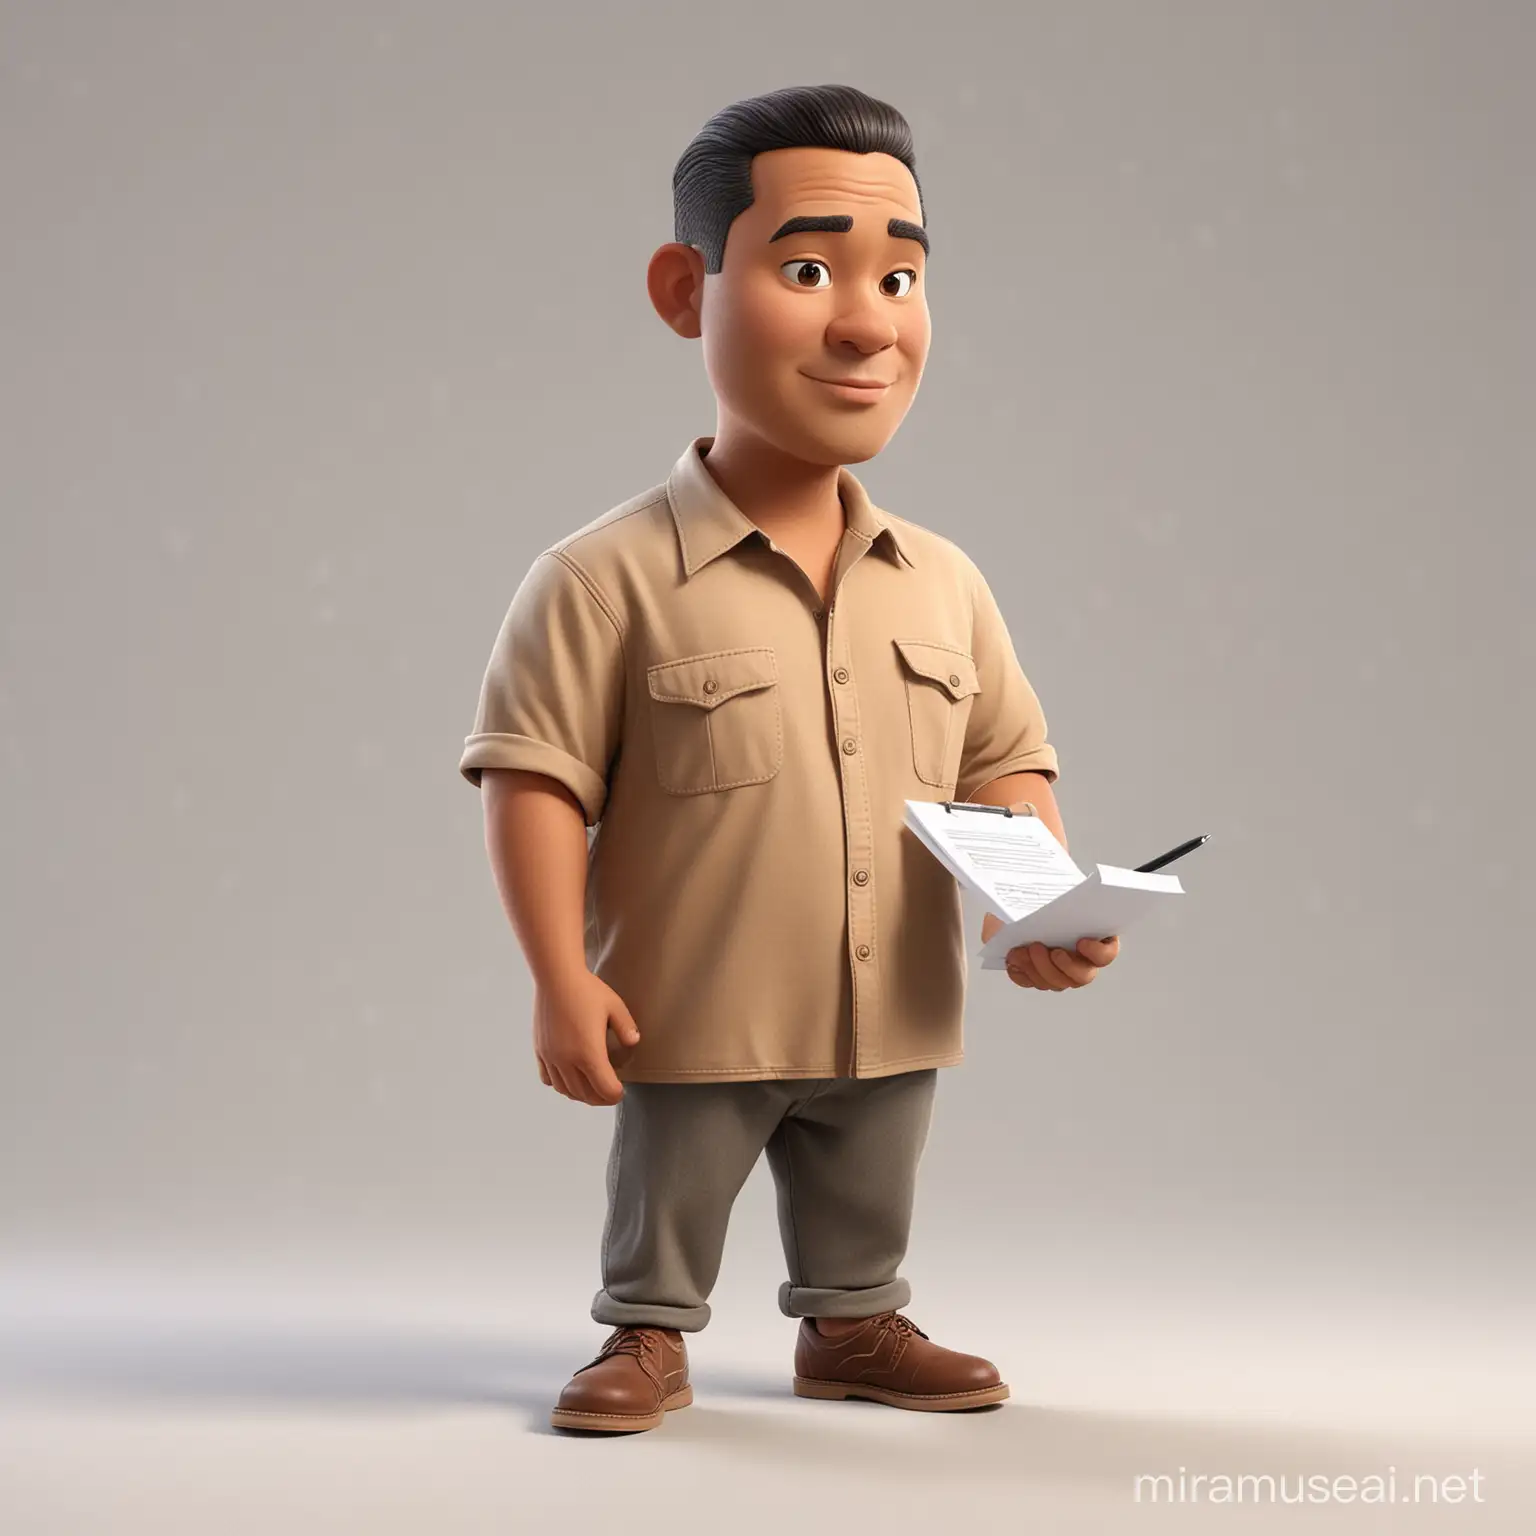 Indonesian Men Signing Contract in Realistic 3D Cartoon Illustration